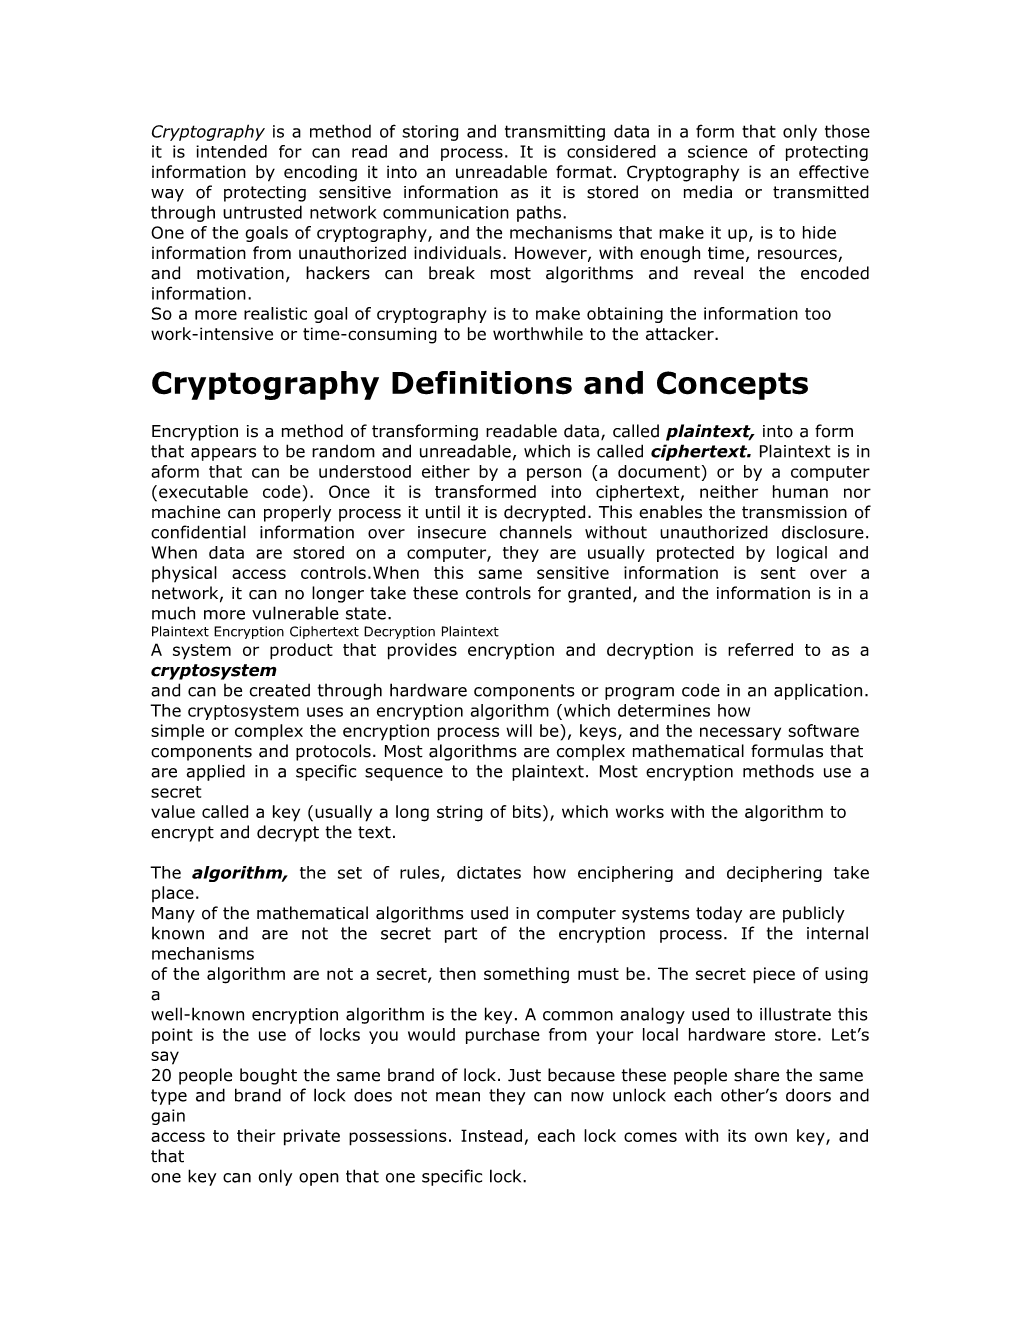 Cryptography Is a Method of Storing and Transmitting Data in a Form That Only Those It